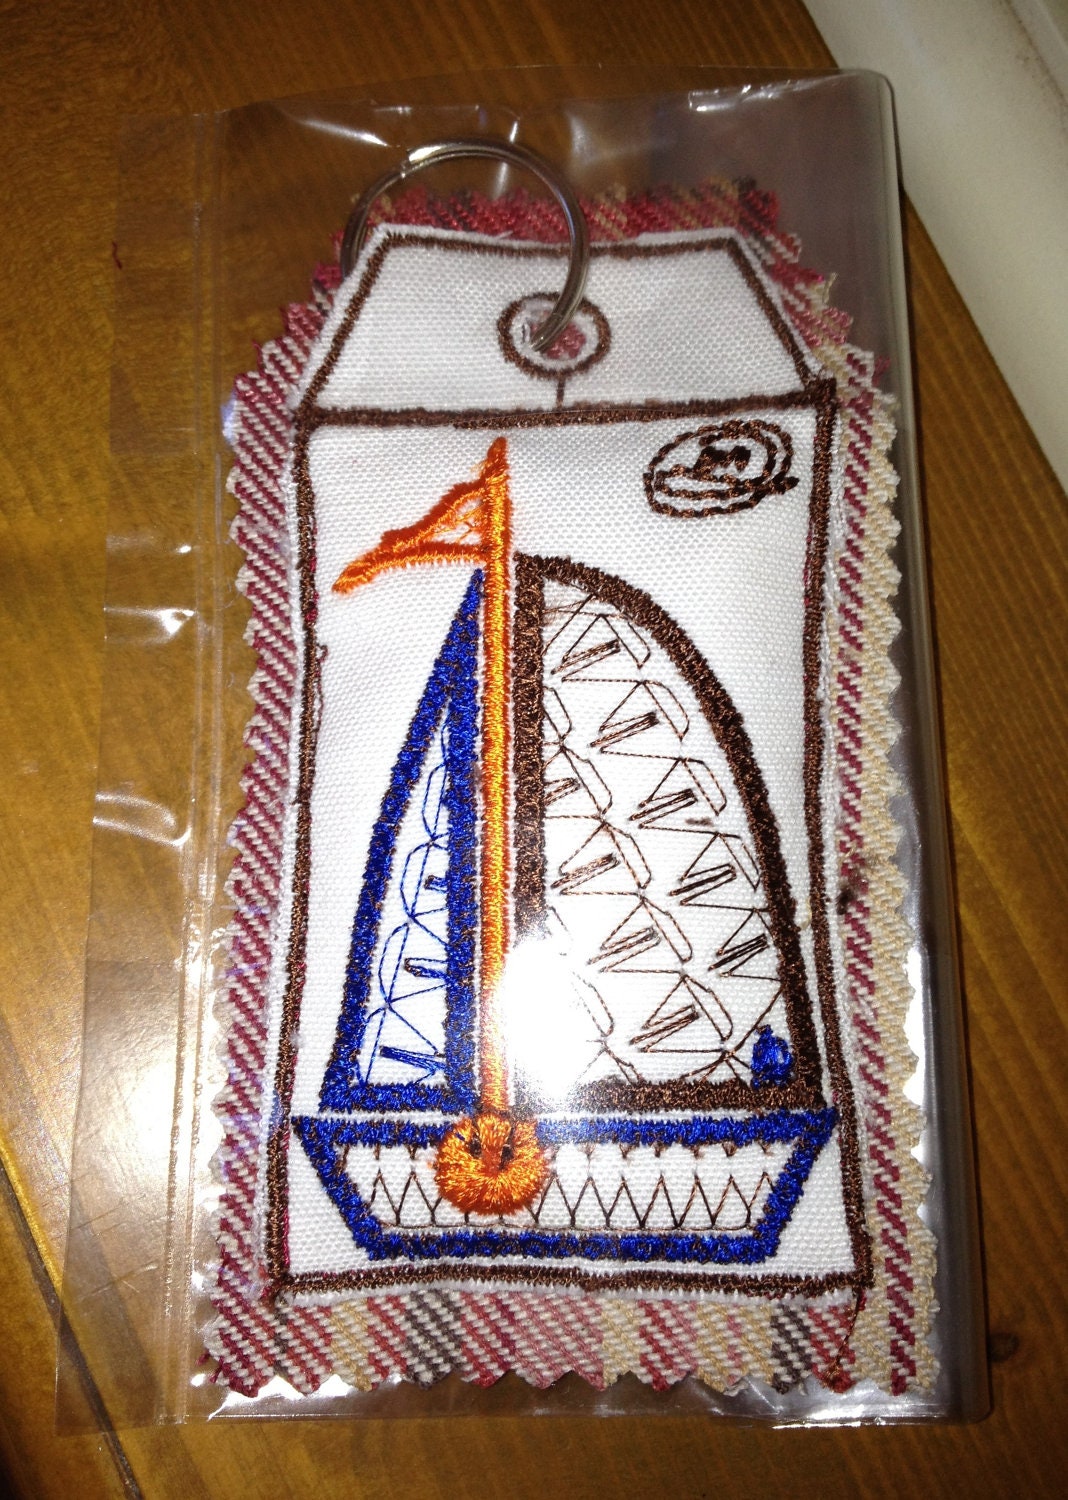 key Ring - Organic Lentil & Whole Clove Fragrance - Embroidery Sailing Boat